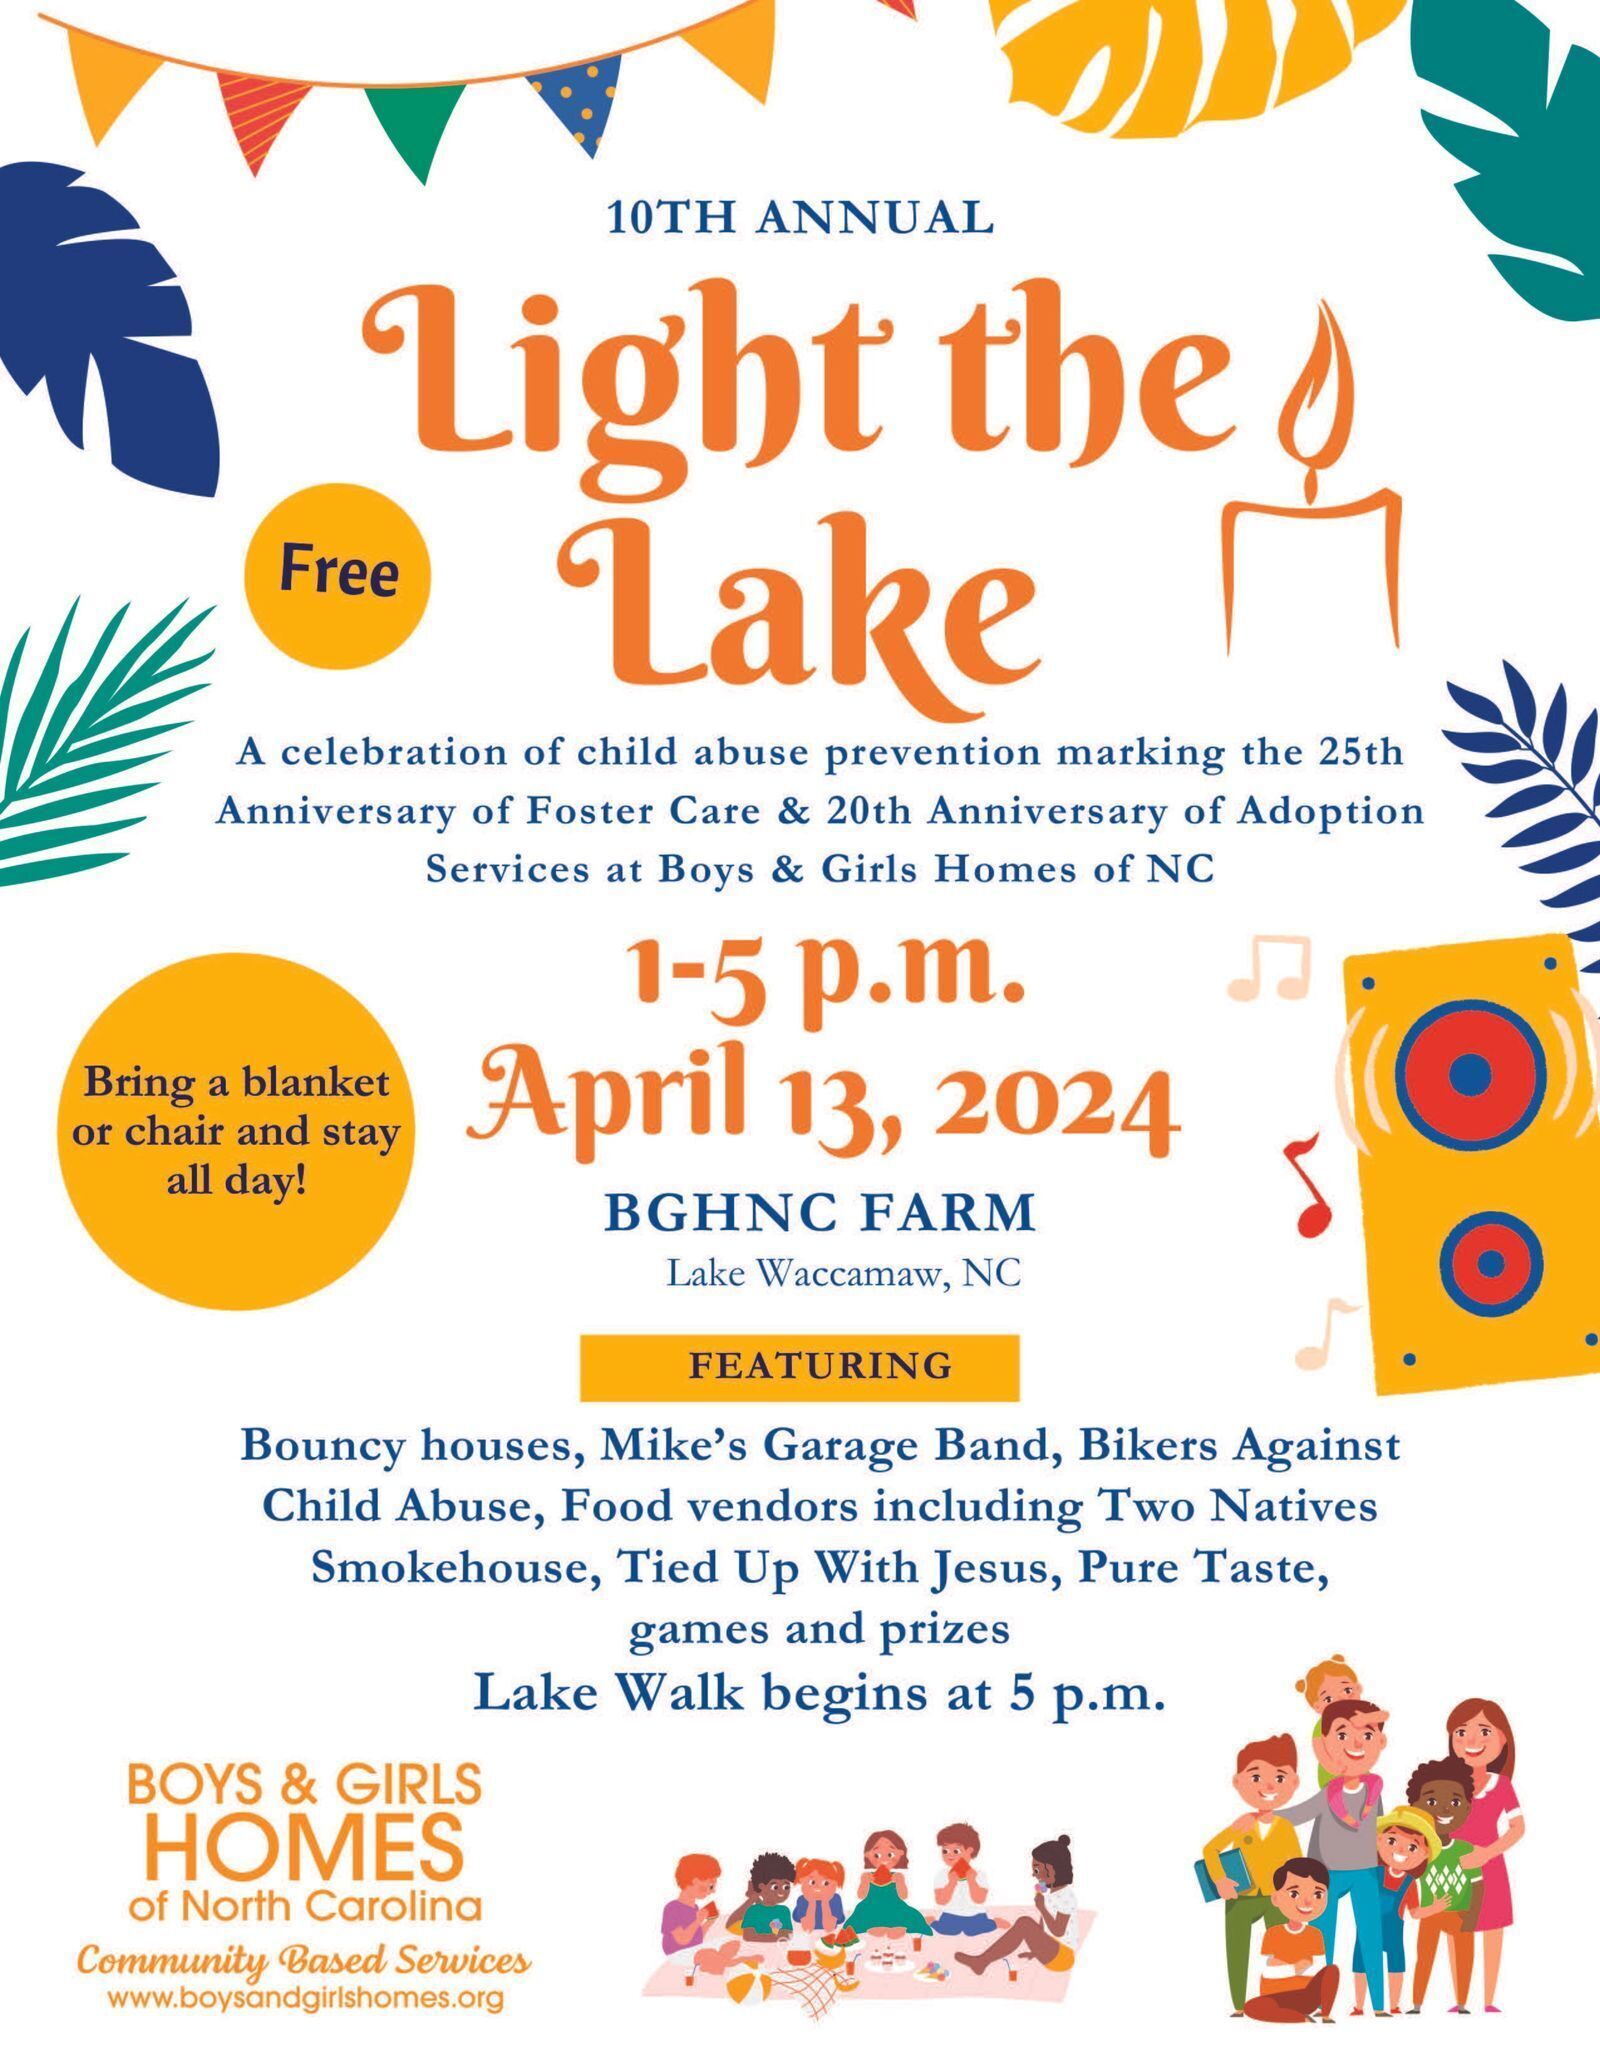 SAVE THE DATE: 10th Annual Light the Lake on April 13 celebrating three major anniversaries at BGHNC